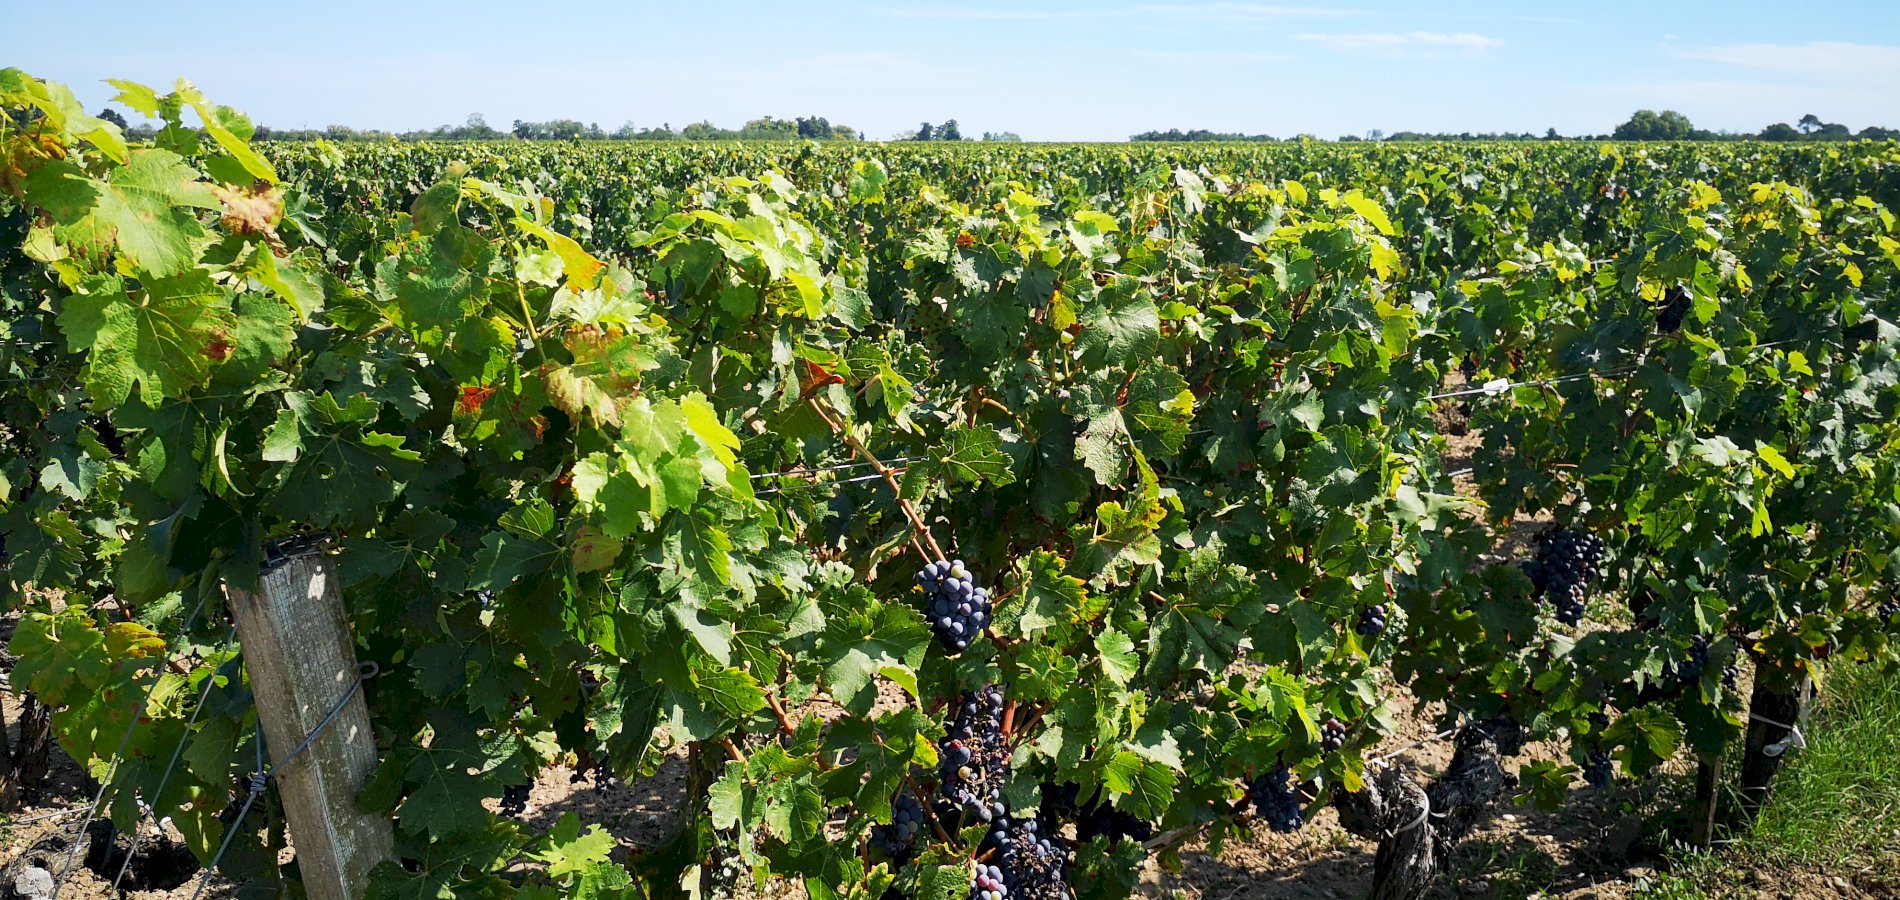 Ophorus Tours - Medoc Wine Tour Private Half Day Trip from Bordeaux for 2 persons